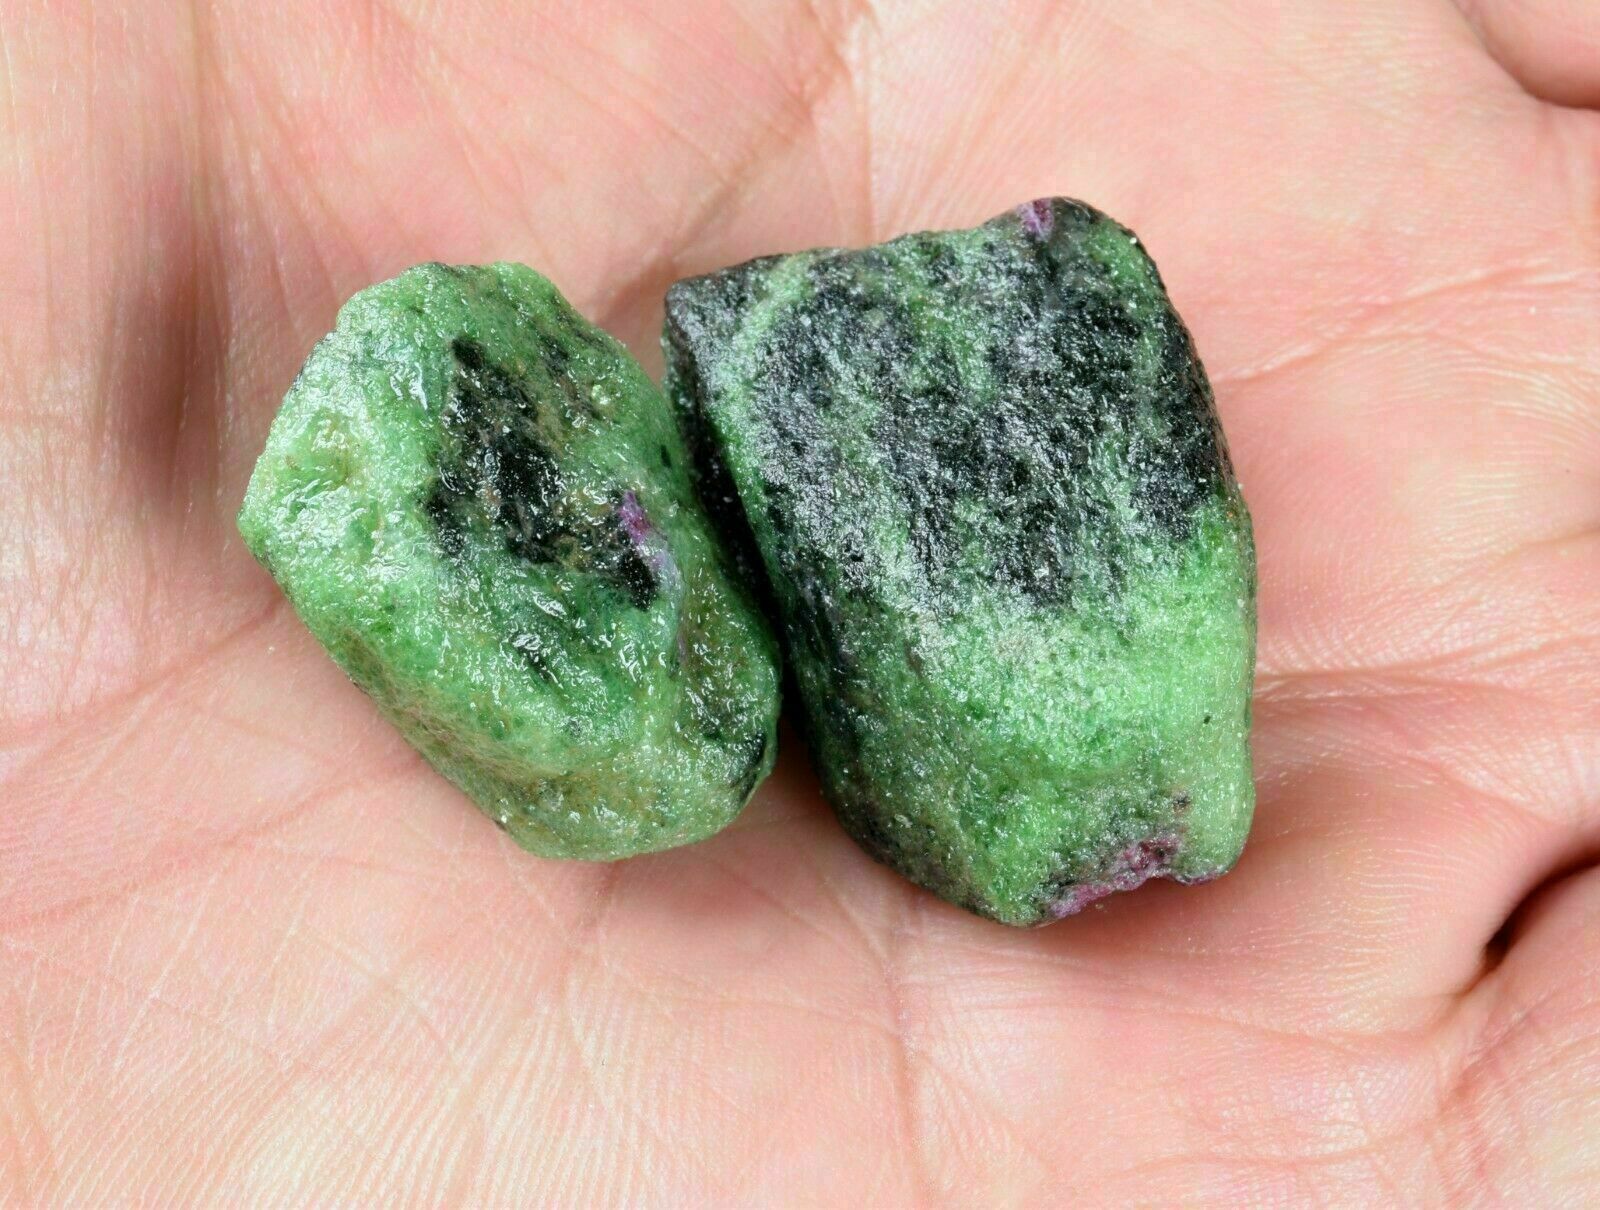 Certified 100% Natural Untreated 174.10 Cts. Ruby Zoisite Bicolor Rough Gemstone